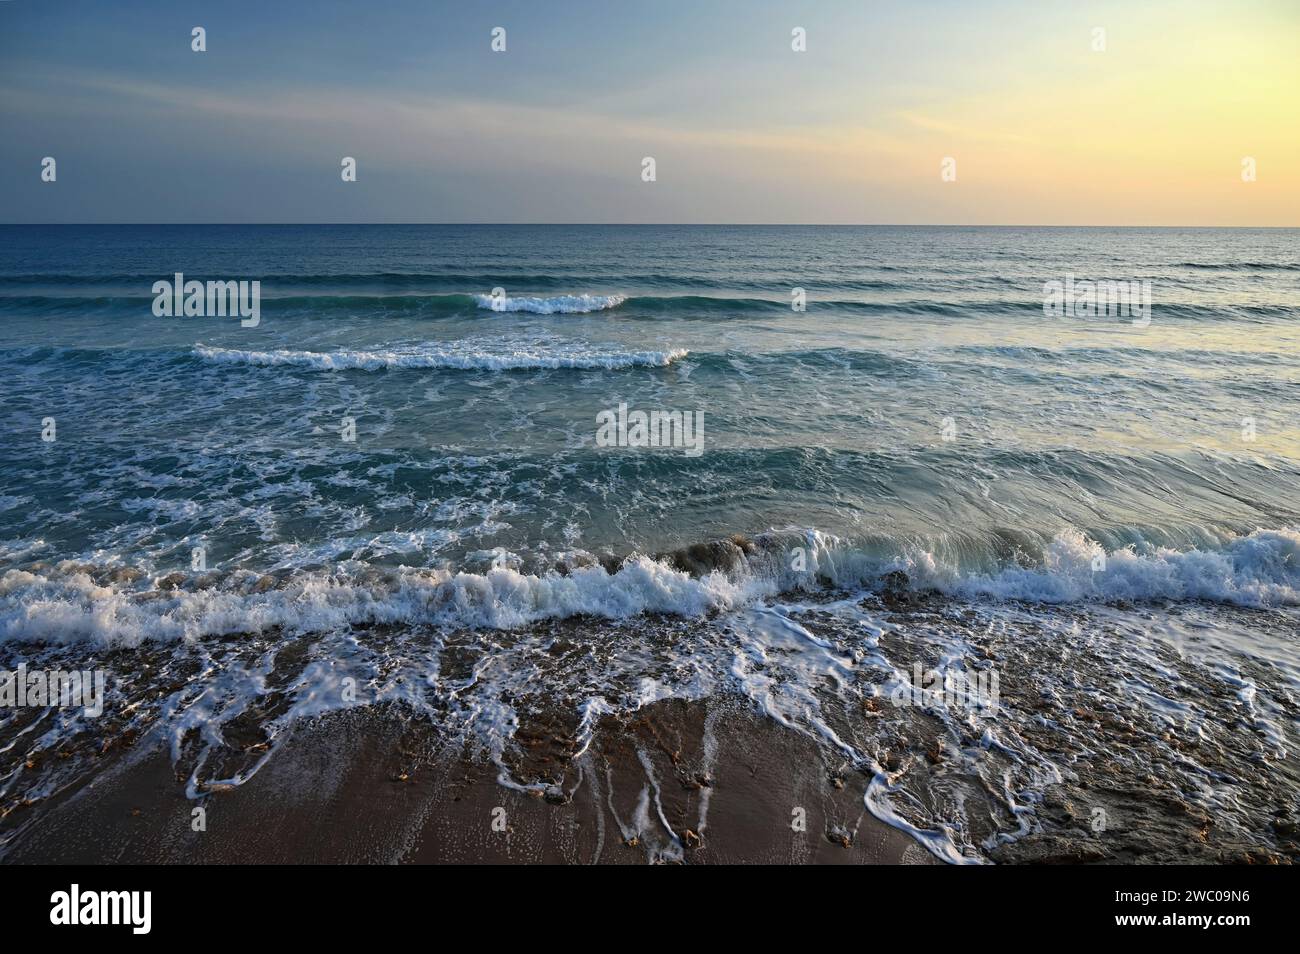 Sea at sunset with waves on the beach. Greece - the island of Corfu. Stock Photo